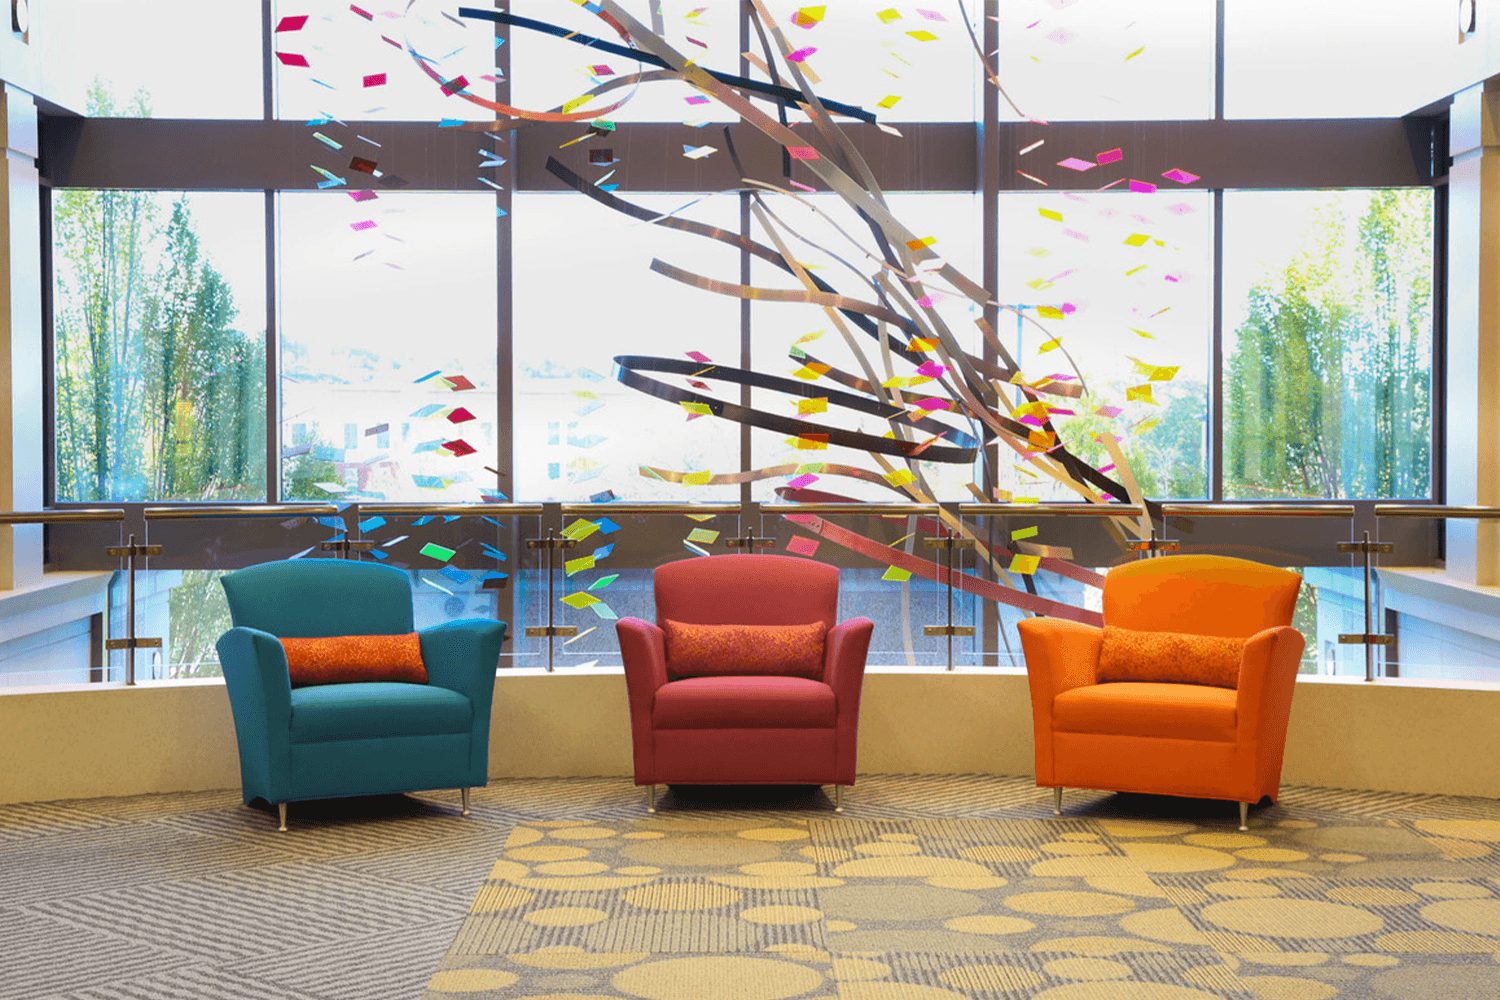 three vibrantly colored chairs, blue, light-red, and orange, overlooking a hanging sculpture and a wall fo windows